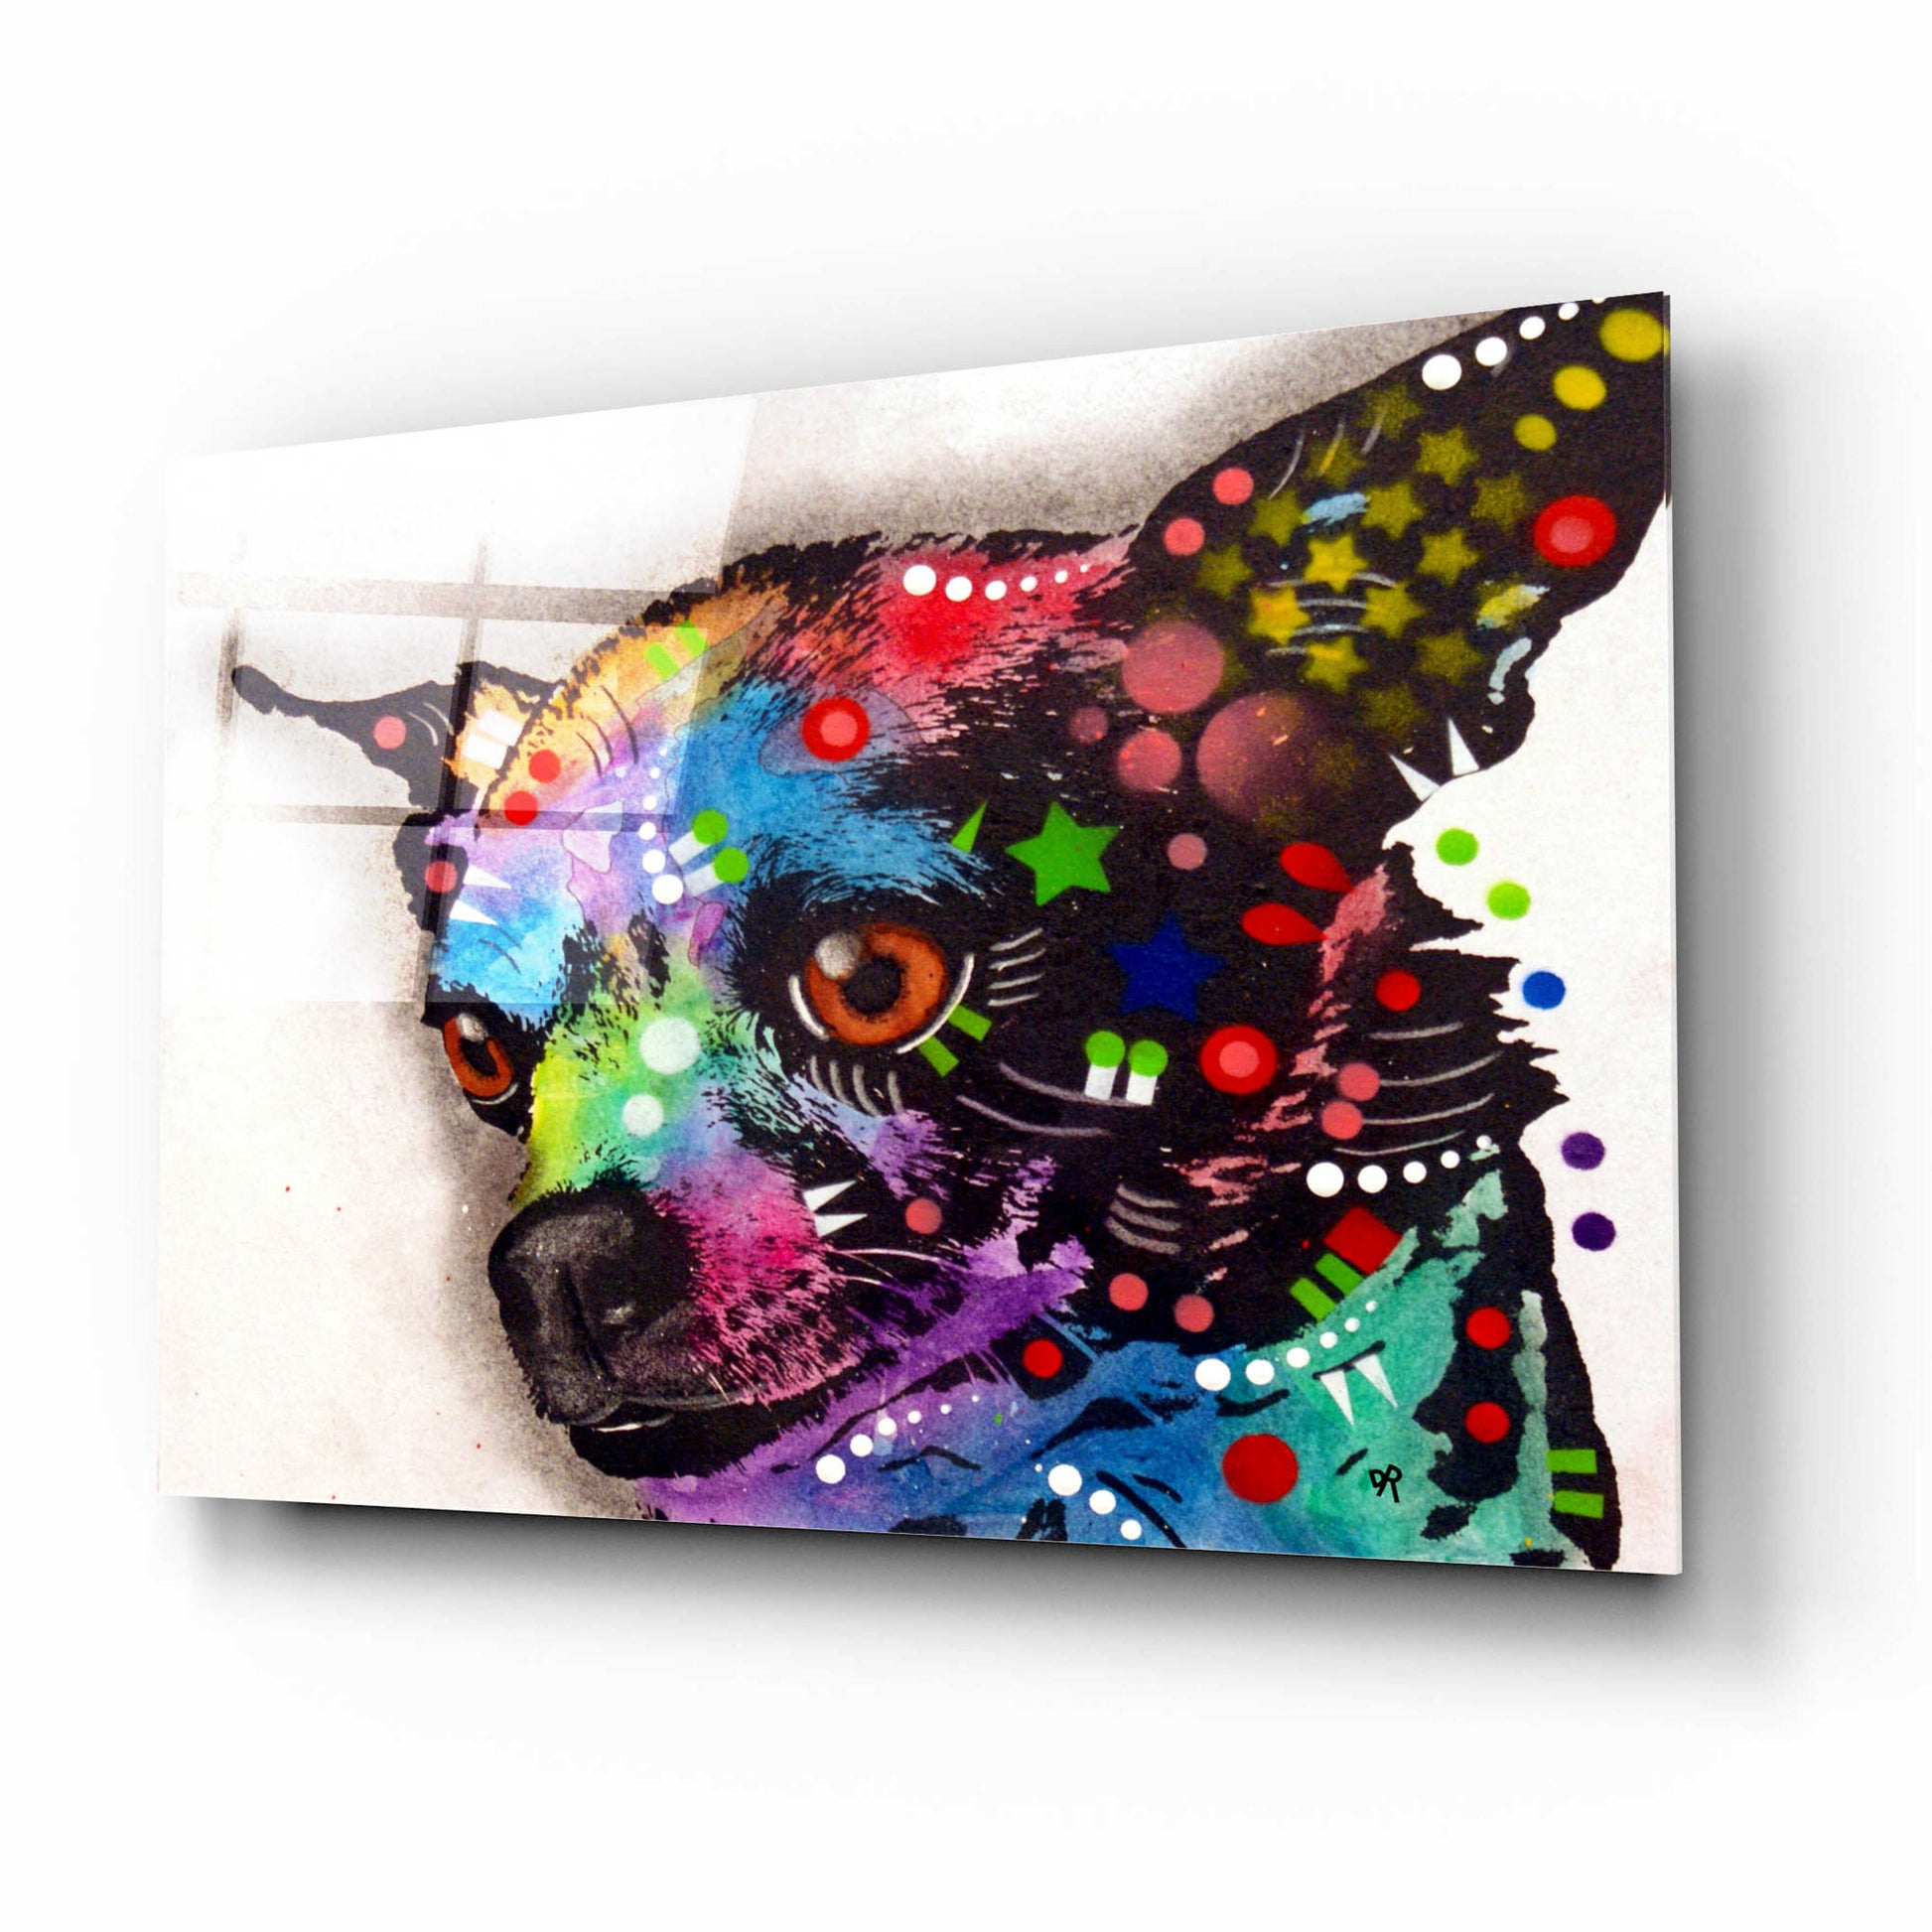 Epic Art 'CHICHI' by Dean Russo, Acrylic Glass Wall Art,16x12